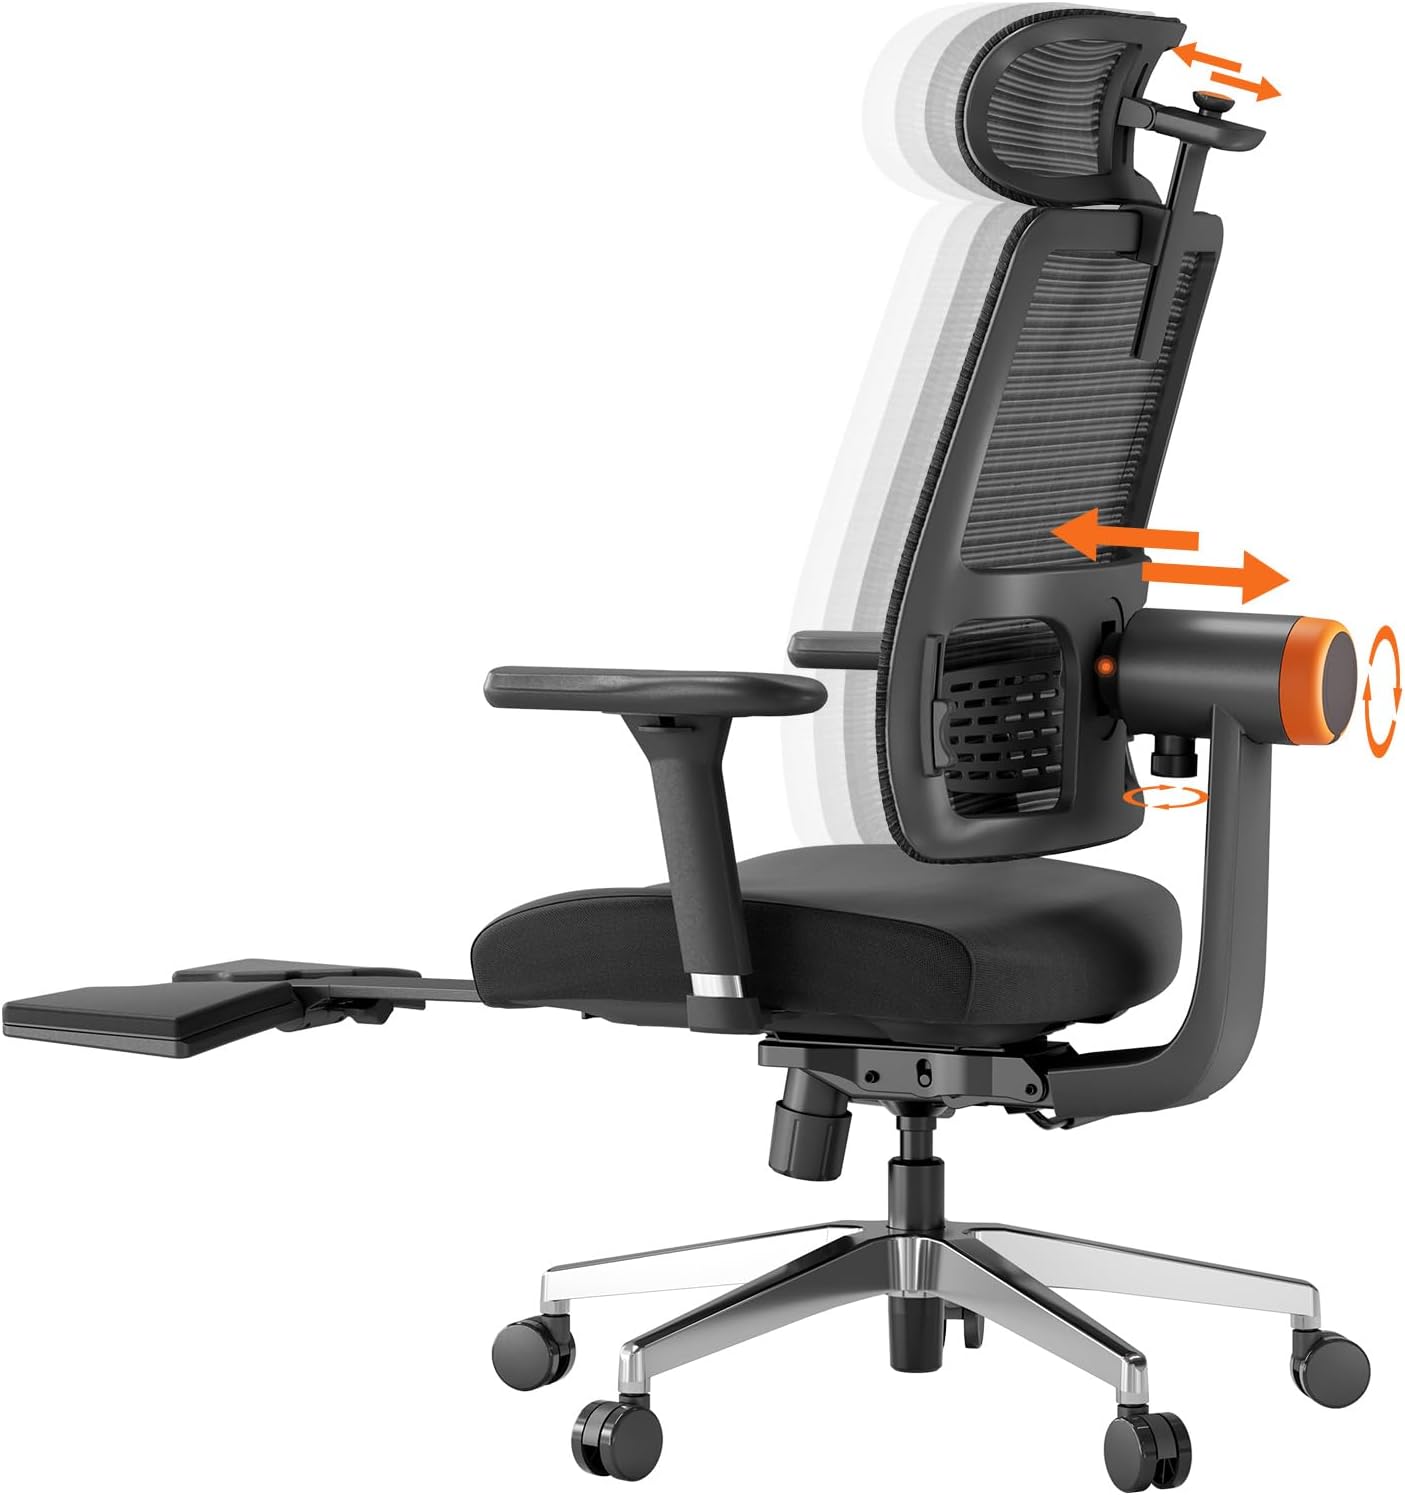 Newtral MagicH Ergonomic Chair with Footrest-High Back Desk Chair with Ultra Adaptive Lumbar Support, 5D Headrest, 4D Armrest, Adjustable Seat Depth & Height, Home Office